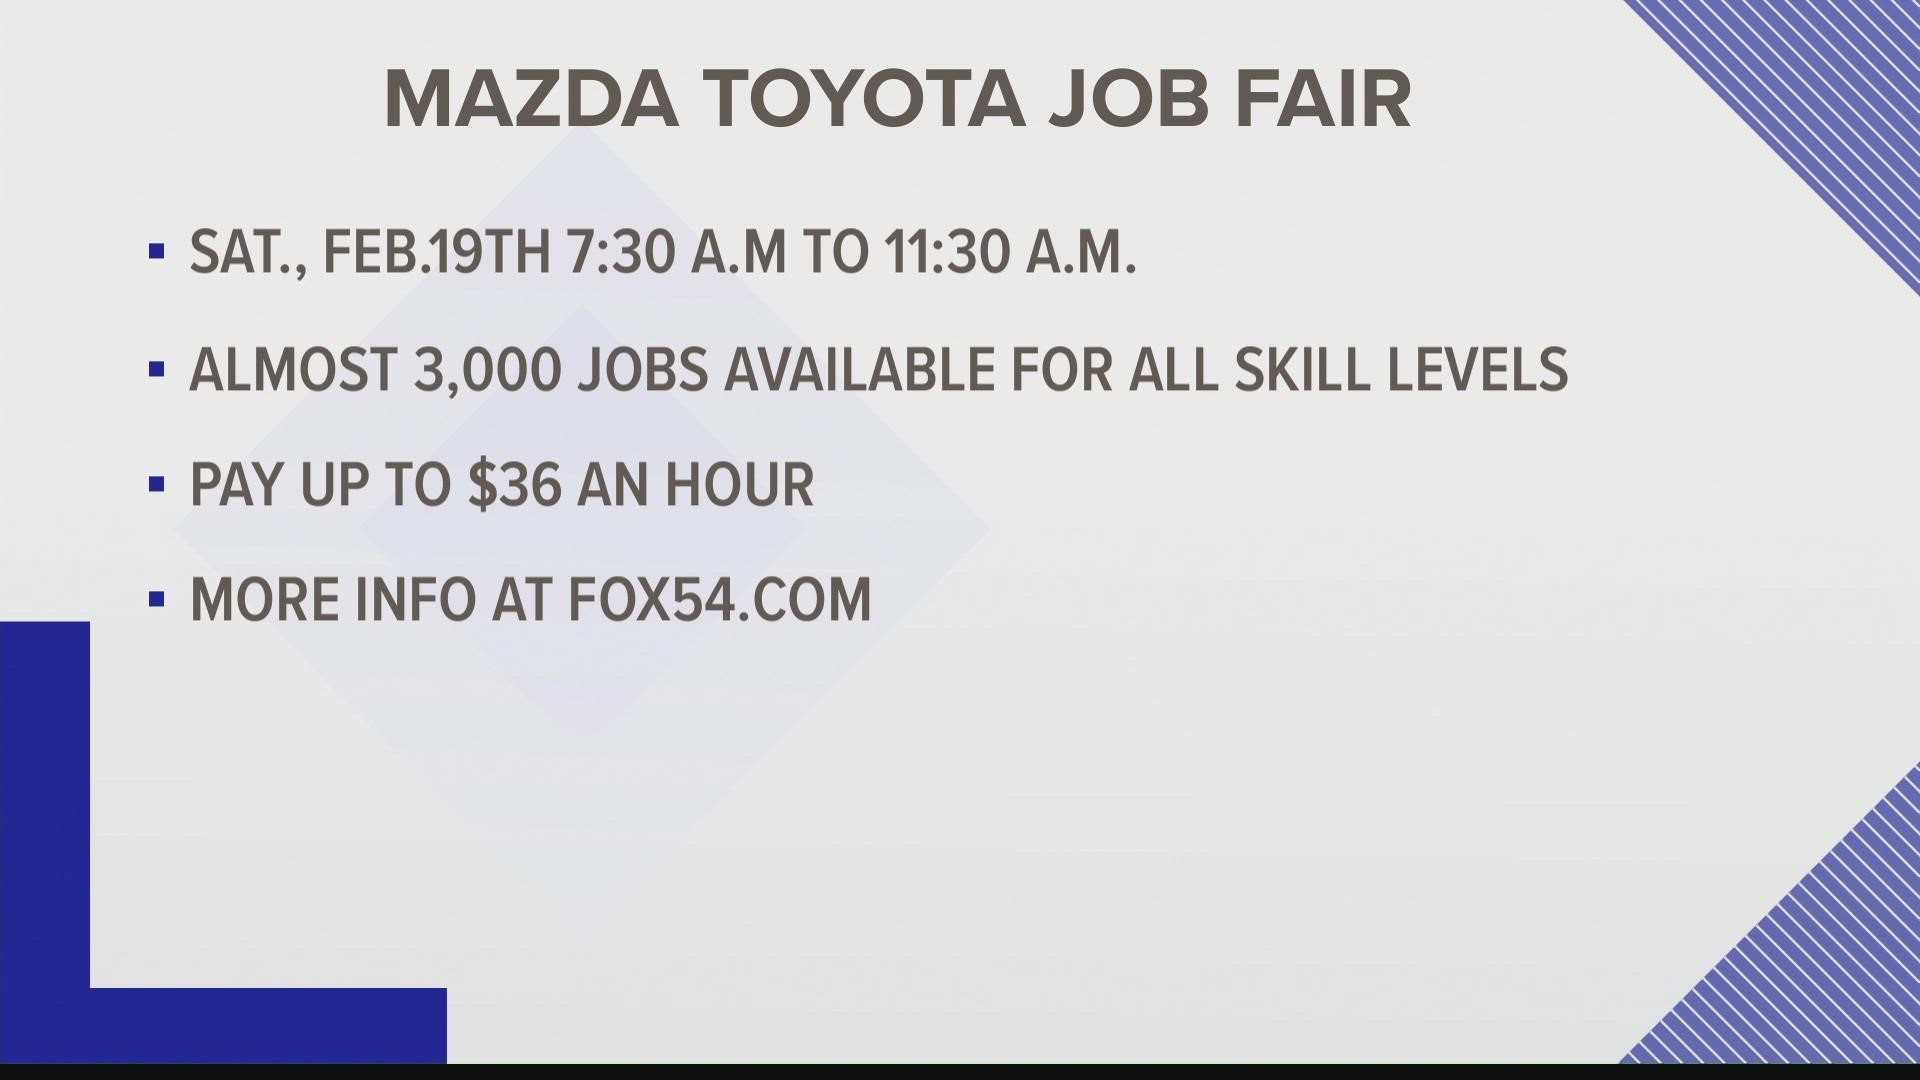 Mazda Toyota Manufacturing and its suppliers host a job fair on Saturday, Feb. 19.